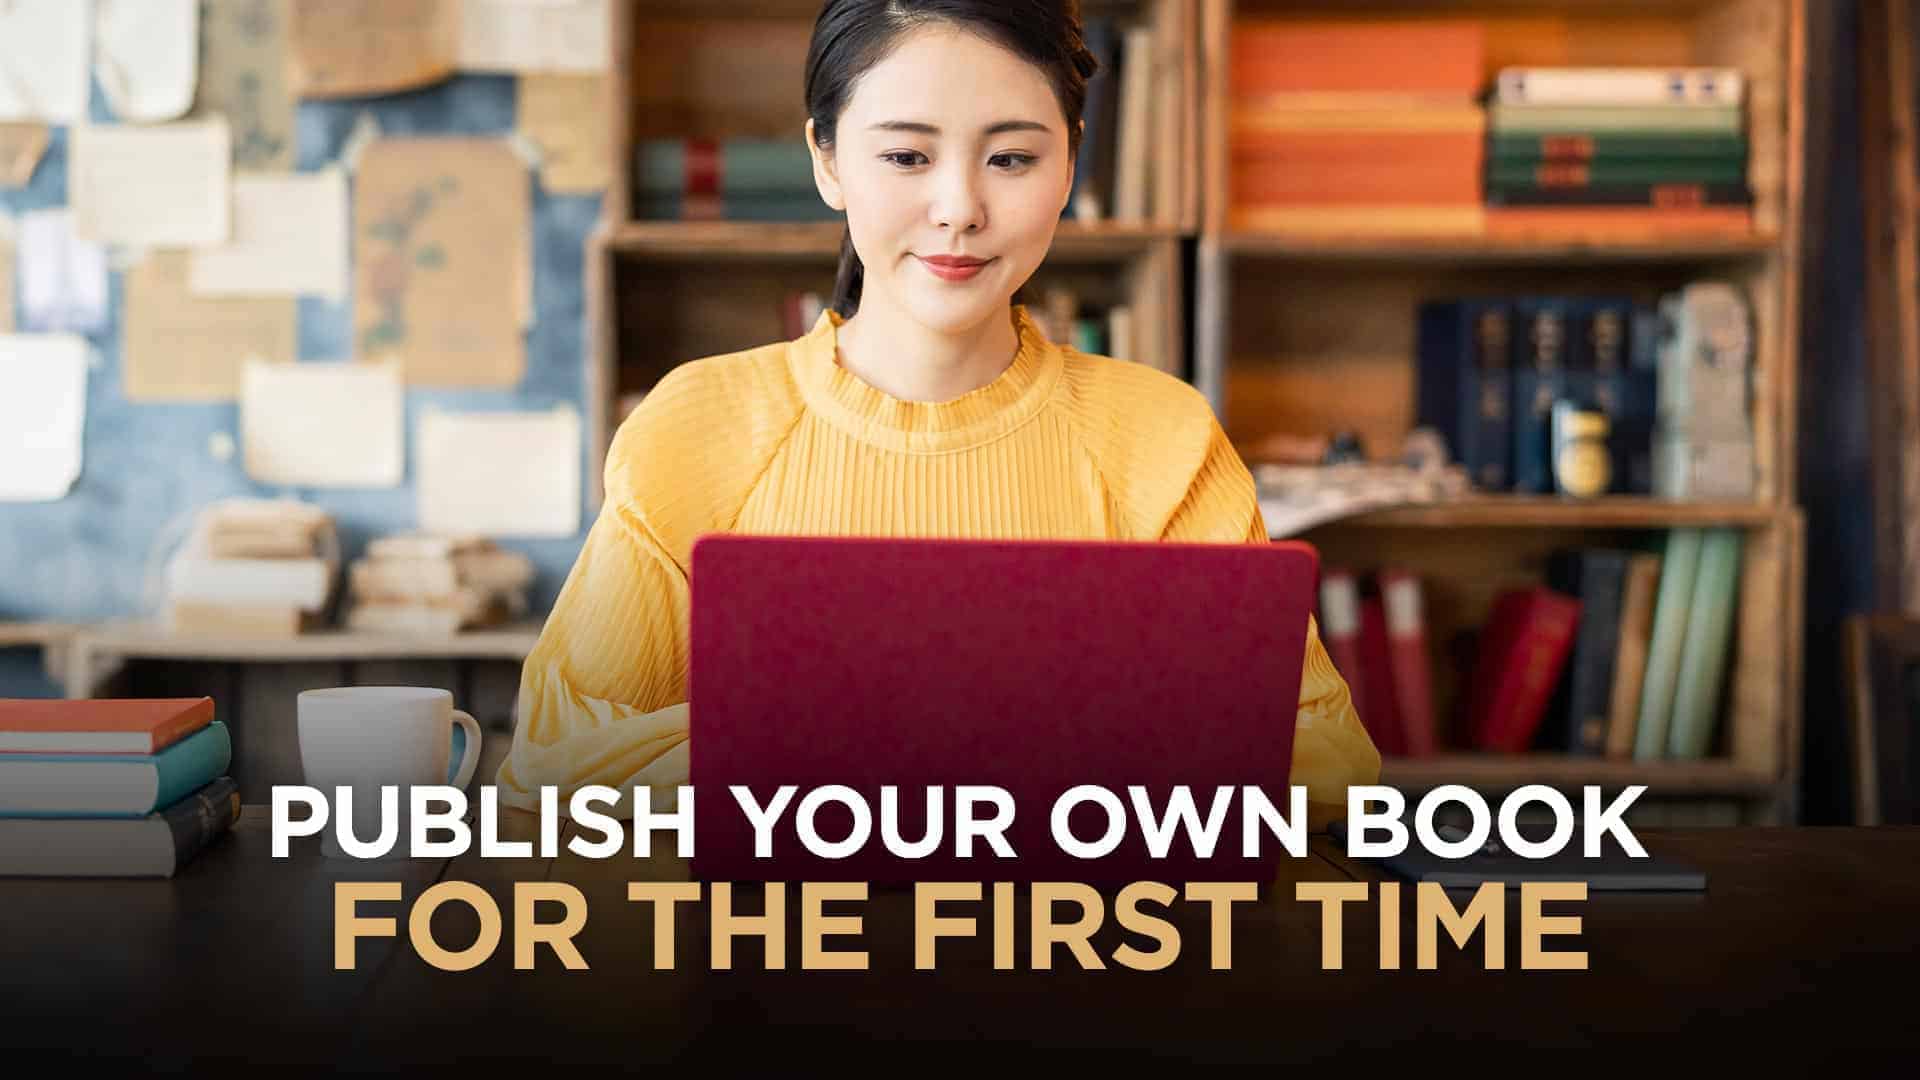 How To Publish Your Own Book For The First Time